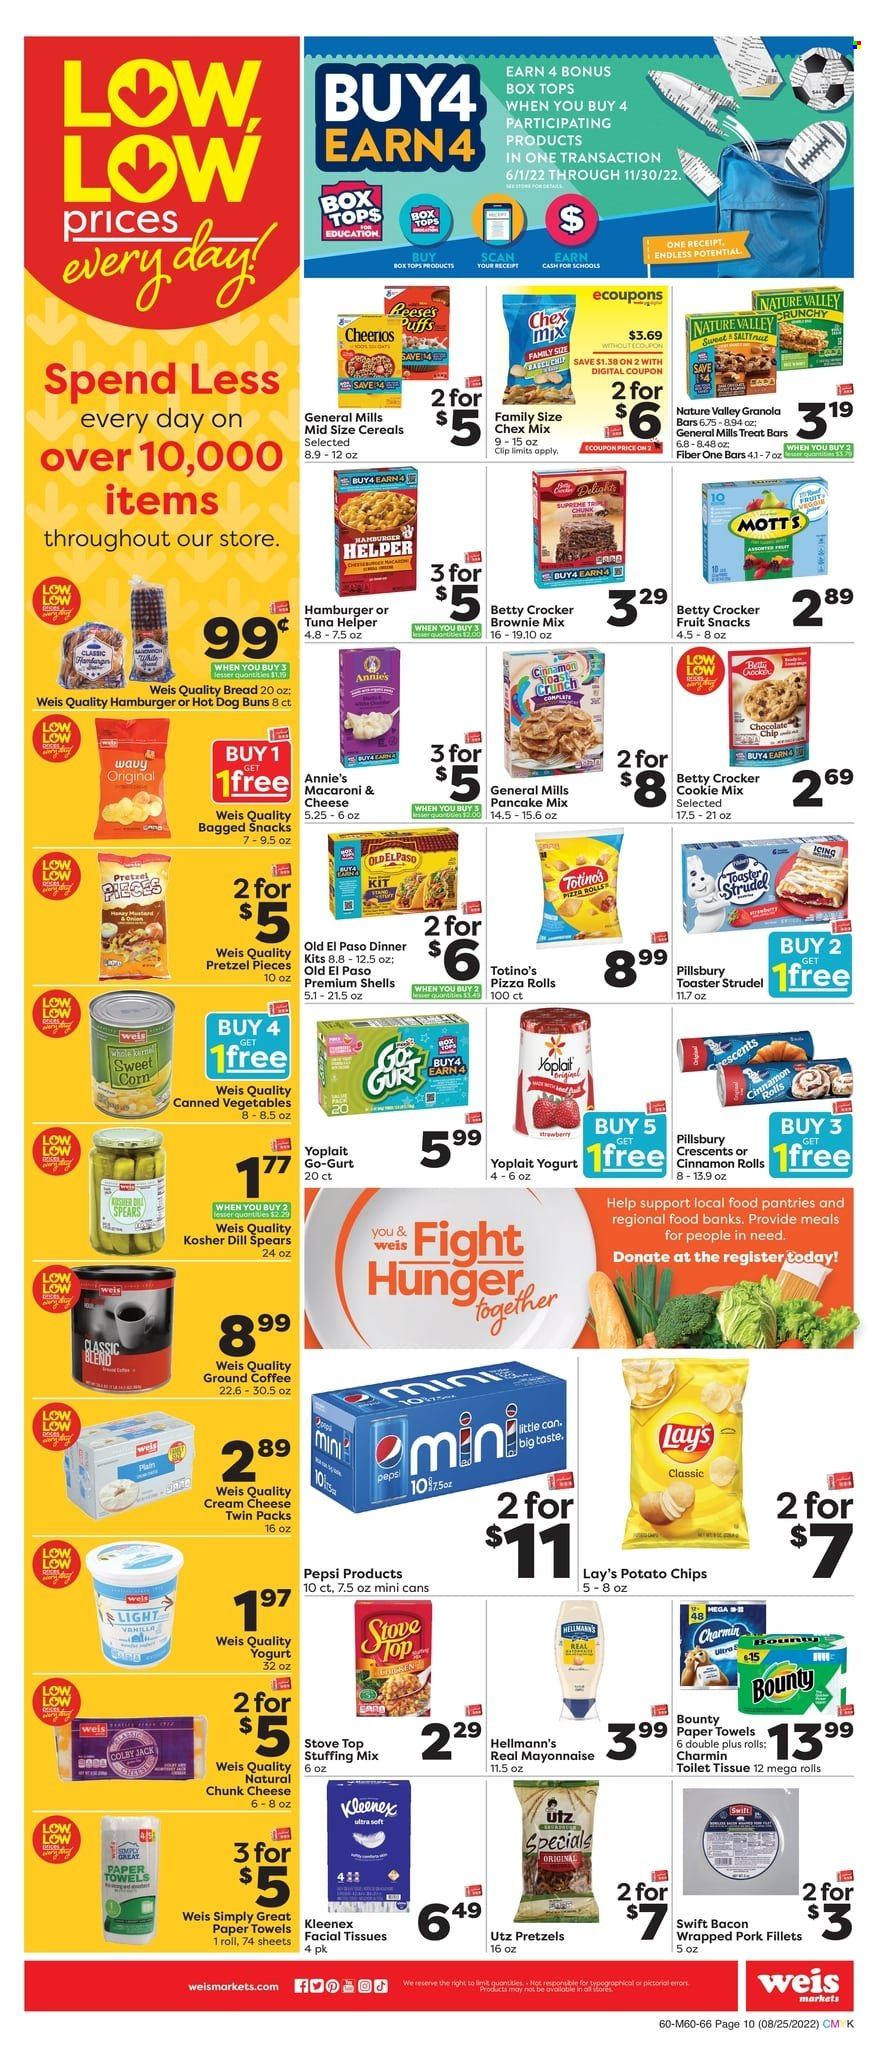 thumbnail - Weis Flyer - 08/25/2022 - 10/05/2022 - Sales products - bread, pretzels, pizza rolls, strudel, buns, Old El Paso, cinnamon roll, puffs, brownie mix, corn, sweet corn, Mott's, tuna, macaroni & cheese, pizza, pancakes, Pillsbury, dinner kit, Annie's, bacon, Colby cheese, chunk cheese, yoghurt, Yoplait, mayonnaise, Hellmann’s, Reese's, Bounty, fruit snack, potato chips, chips, Lay’s, Chex Mix, stuffing mix, canned vegetables, Cheerios, granola bar, Nature Valley, Fiber One, dill, Pepsi, coffee, ground coffee, Kleenex, toilet paper, kitchen towels, paper towels, Charmin, facial tissues, stove. Page 10.